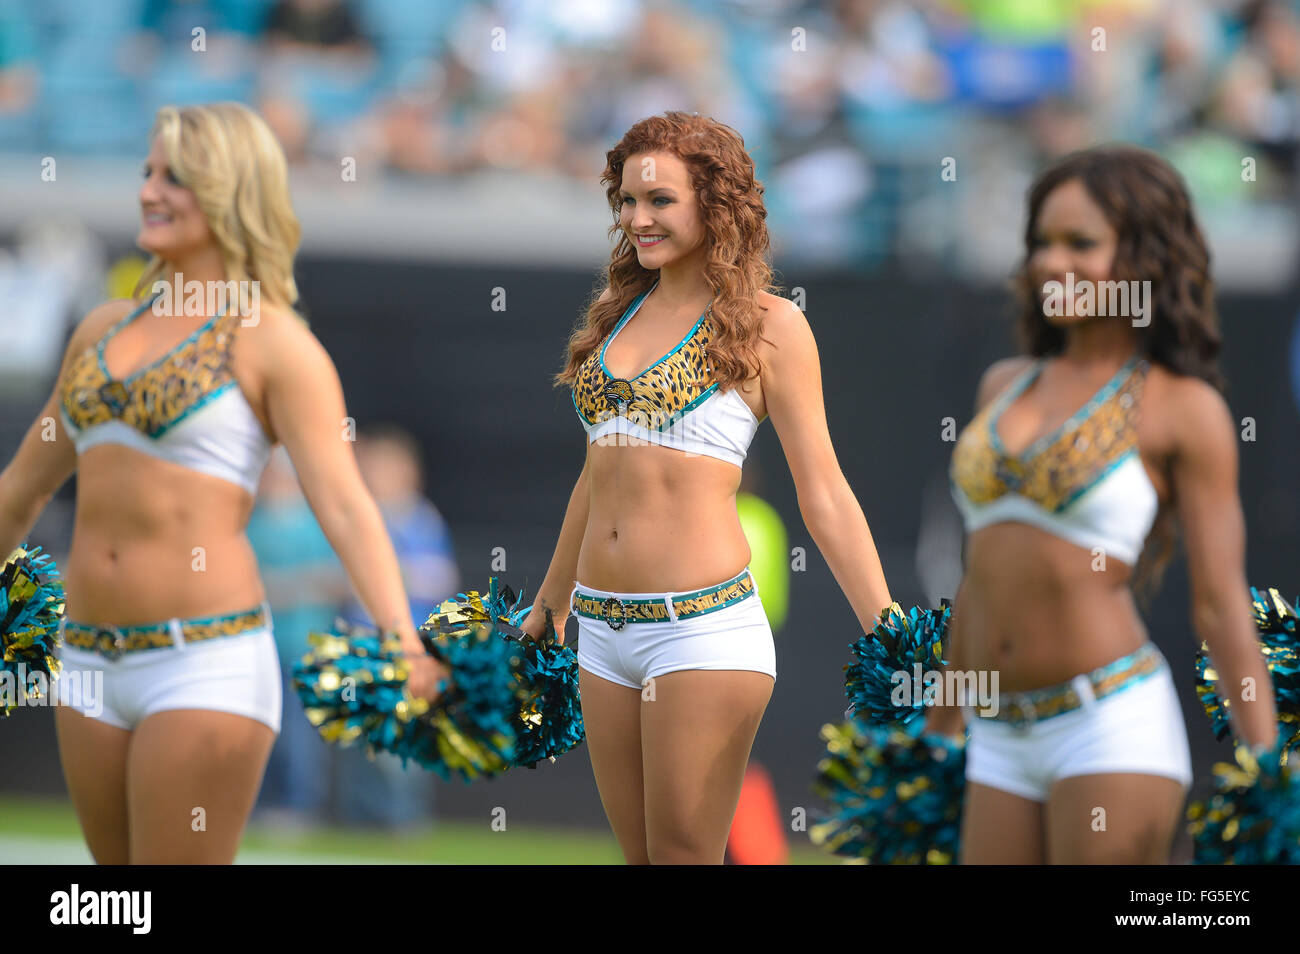 Jacksonville, FL, USA. 9th Dec, 2012. Jacksonville Jaguars cheerleaders during an NFL game against the New York Jets at EverBank Field on Dec 9, 2012 in Jacksonville, Florida. The Jets won 17-10.ZUMA Press/Scott A. Miller. © Scott A. Miller/ZUMA Wire/Alamy Live News Stock Photo